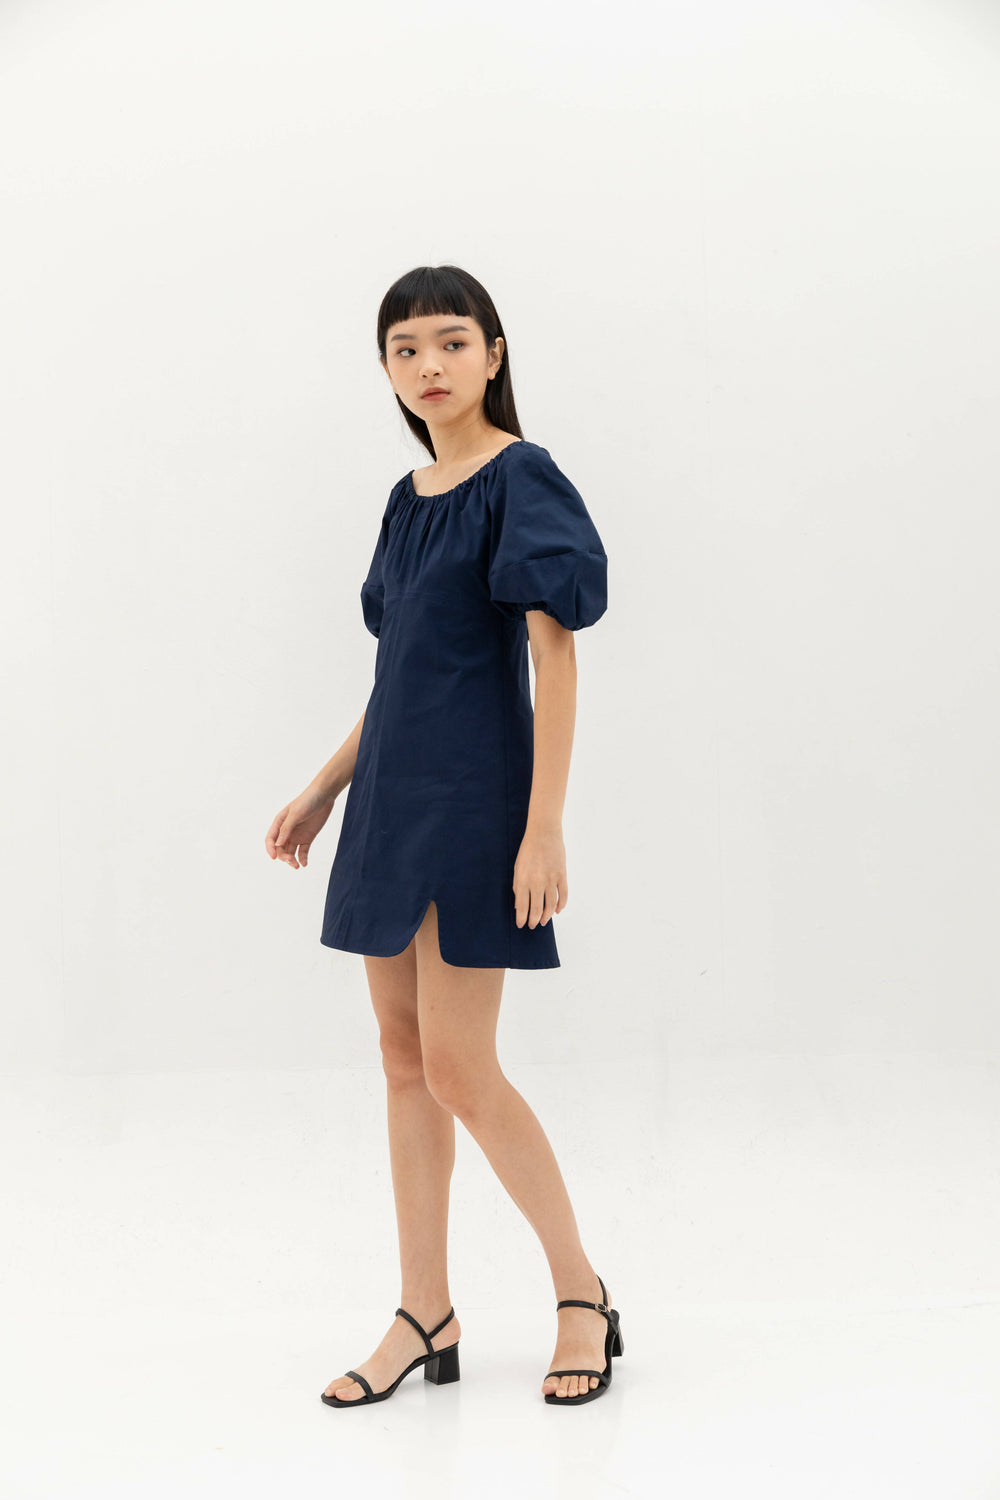 Elasticated neckline and puff sleeve dress - Navy